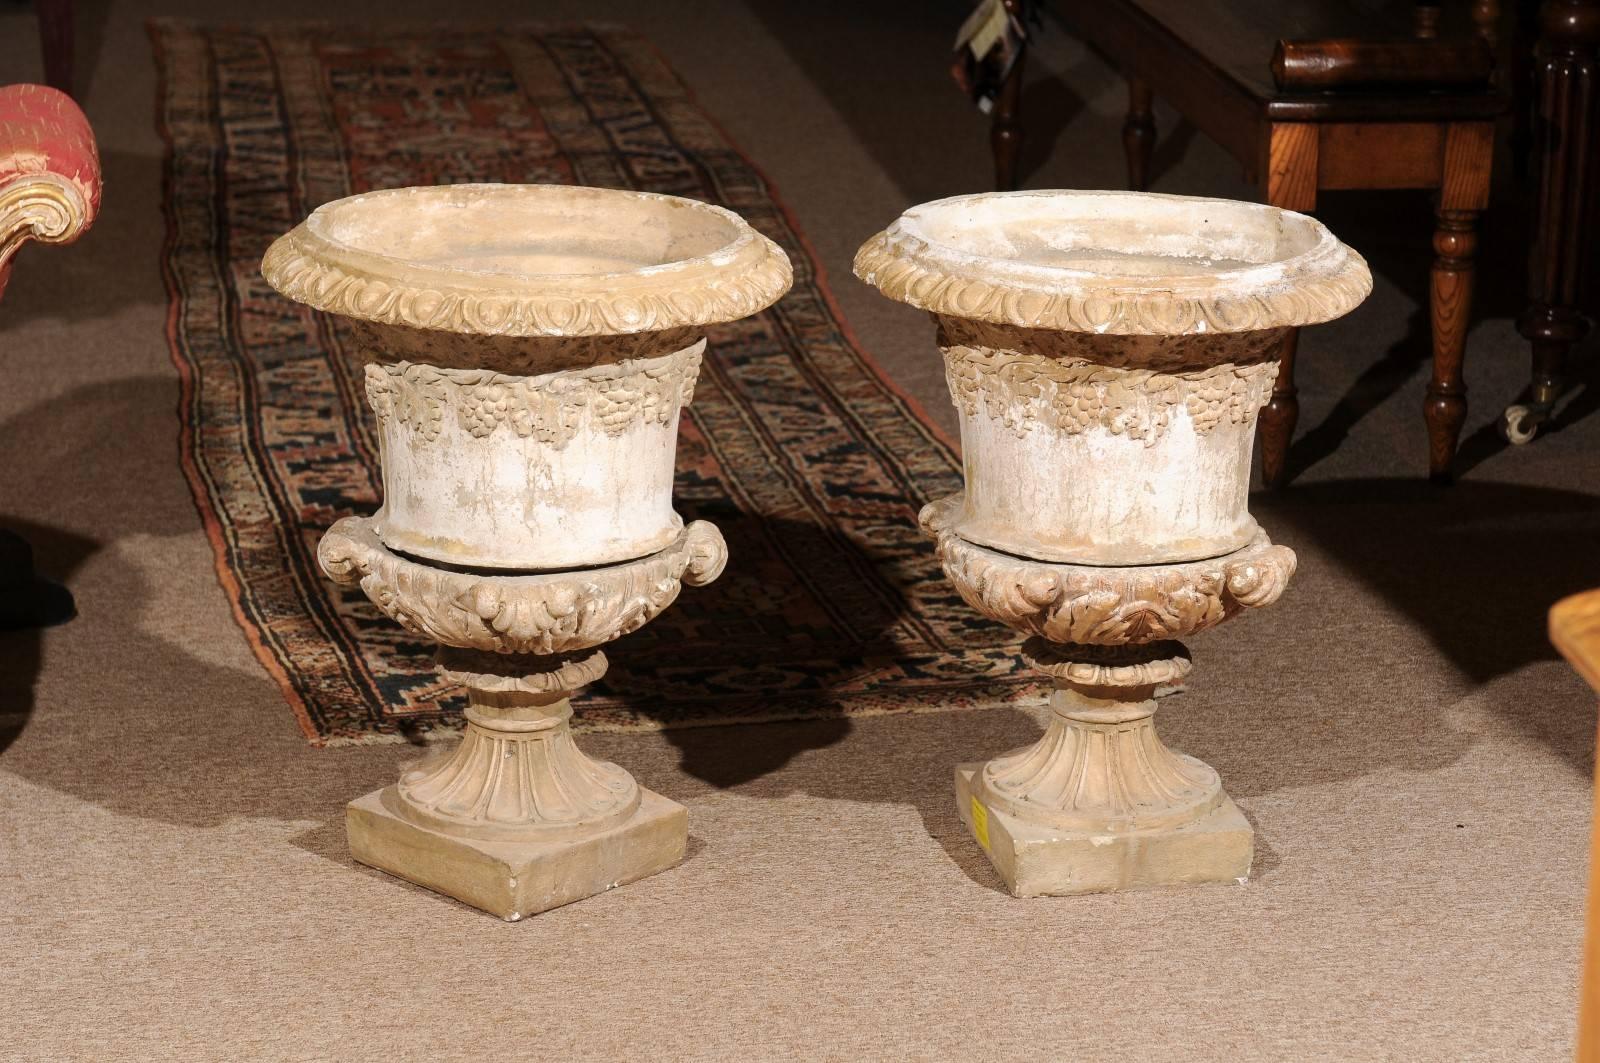 Large pair of cast stone Urn-Shaped Jardinieres / planters with Grapevine Motif, 19th century